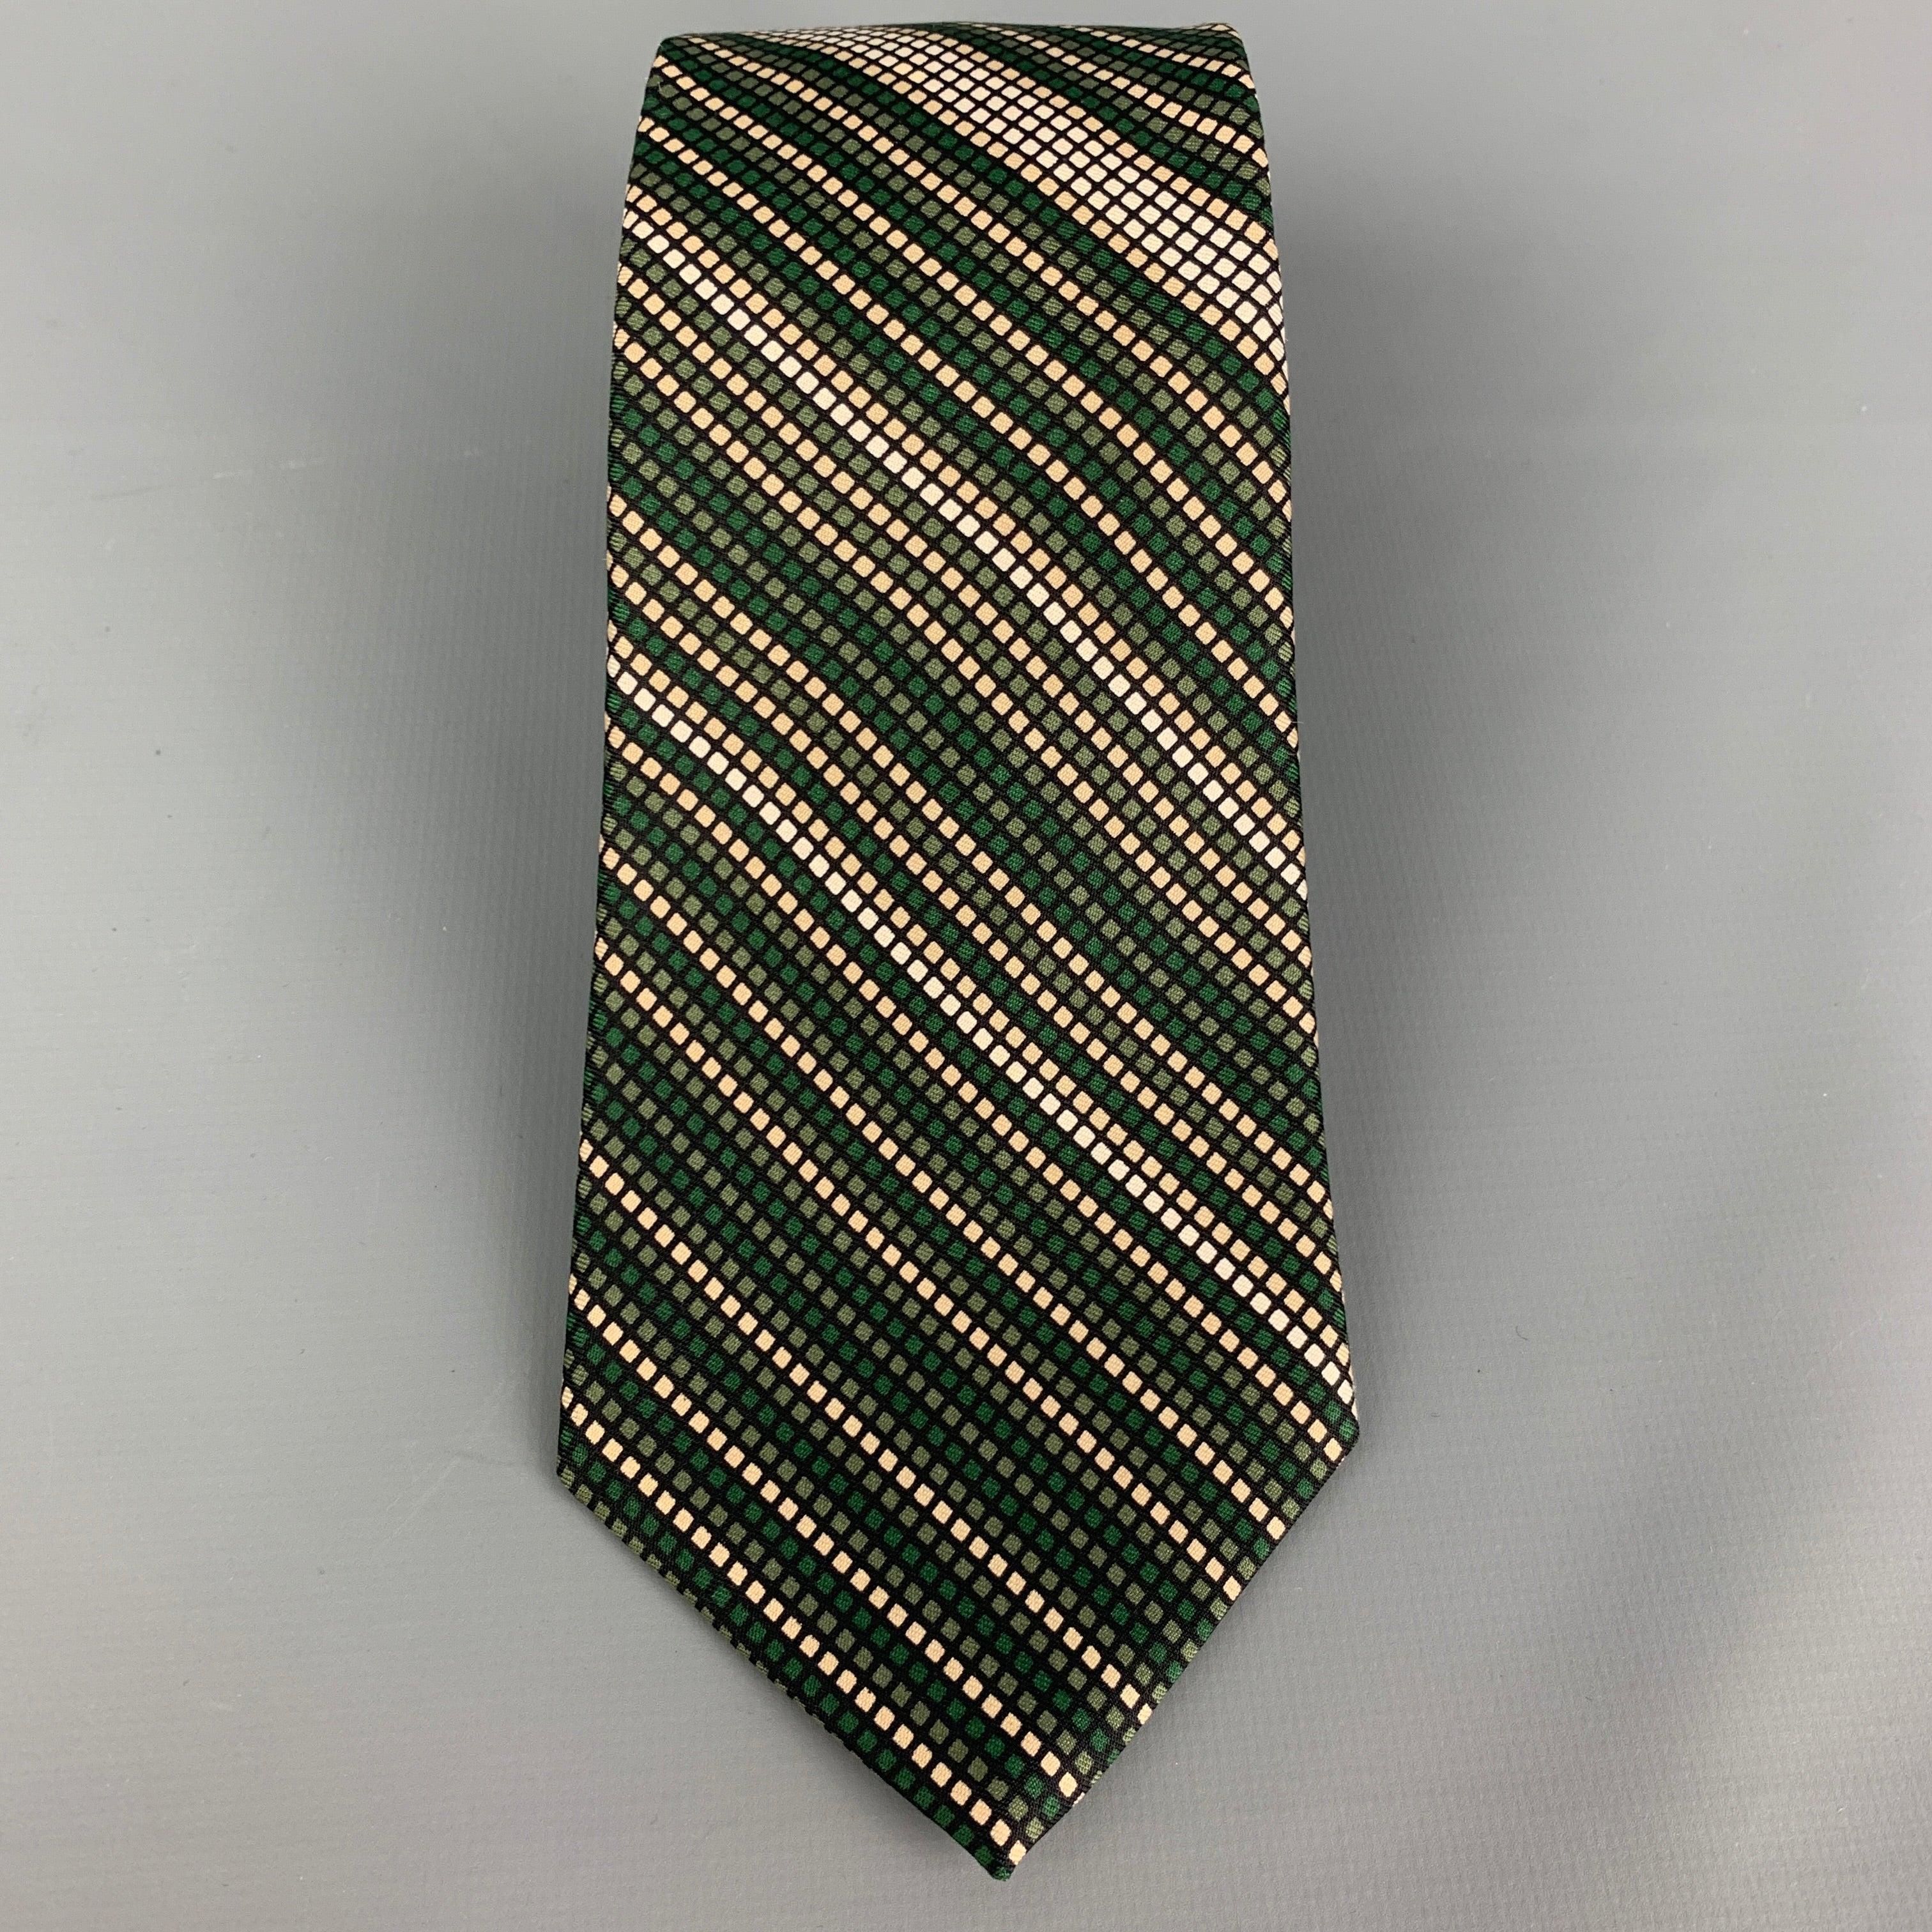 YVES SAINT LAURENT
 necktie comes in a green & white silk twill with a all over checkered print. Very Good Pre-Owned Condition.Width: 3.25 inches 
  
  
  
 Sui Generis Reference: 117583
 Category: Tie
 More Details
  
 Brand: YVES SAINT LAURENT
